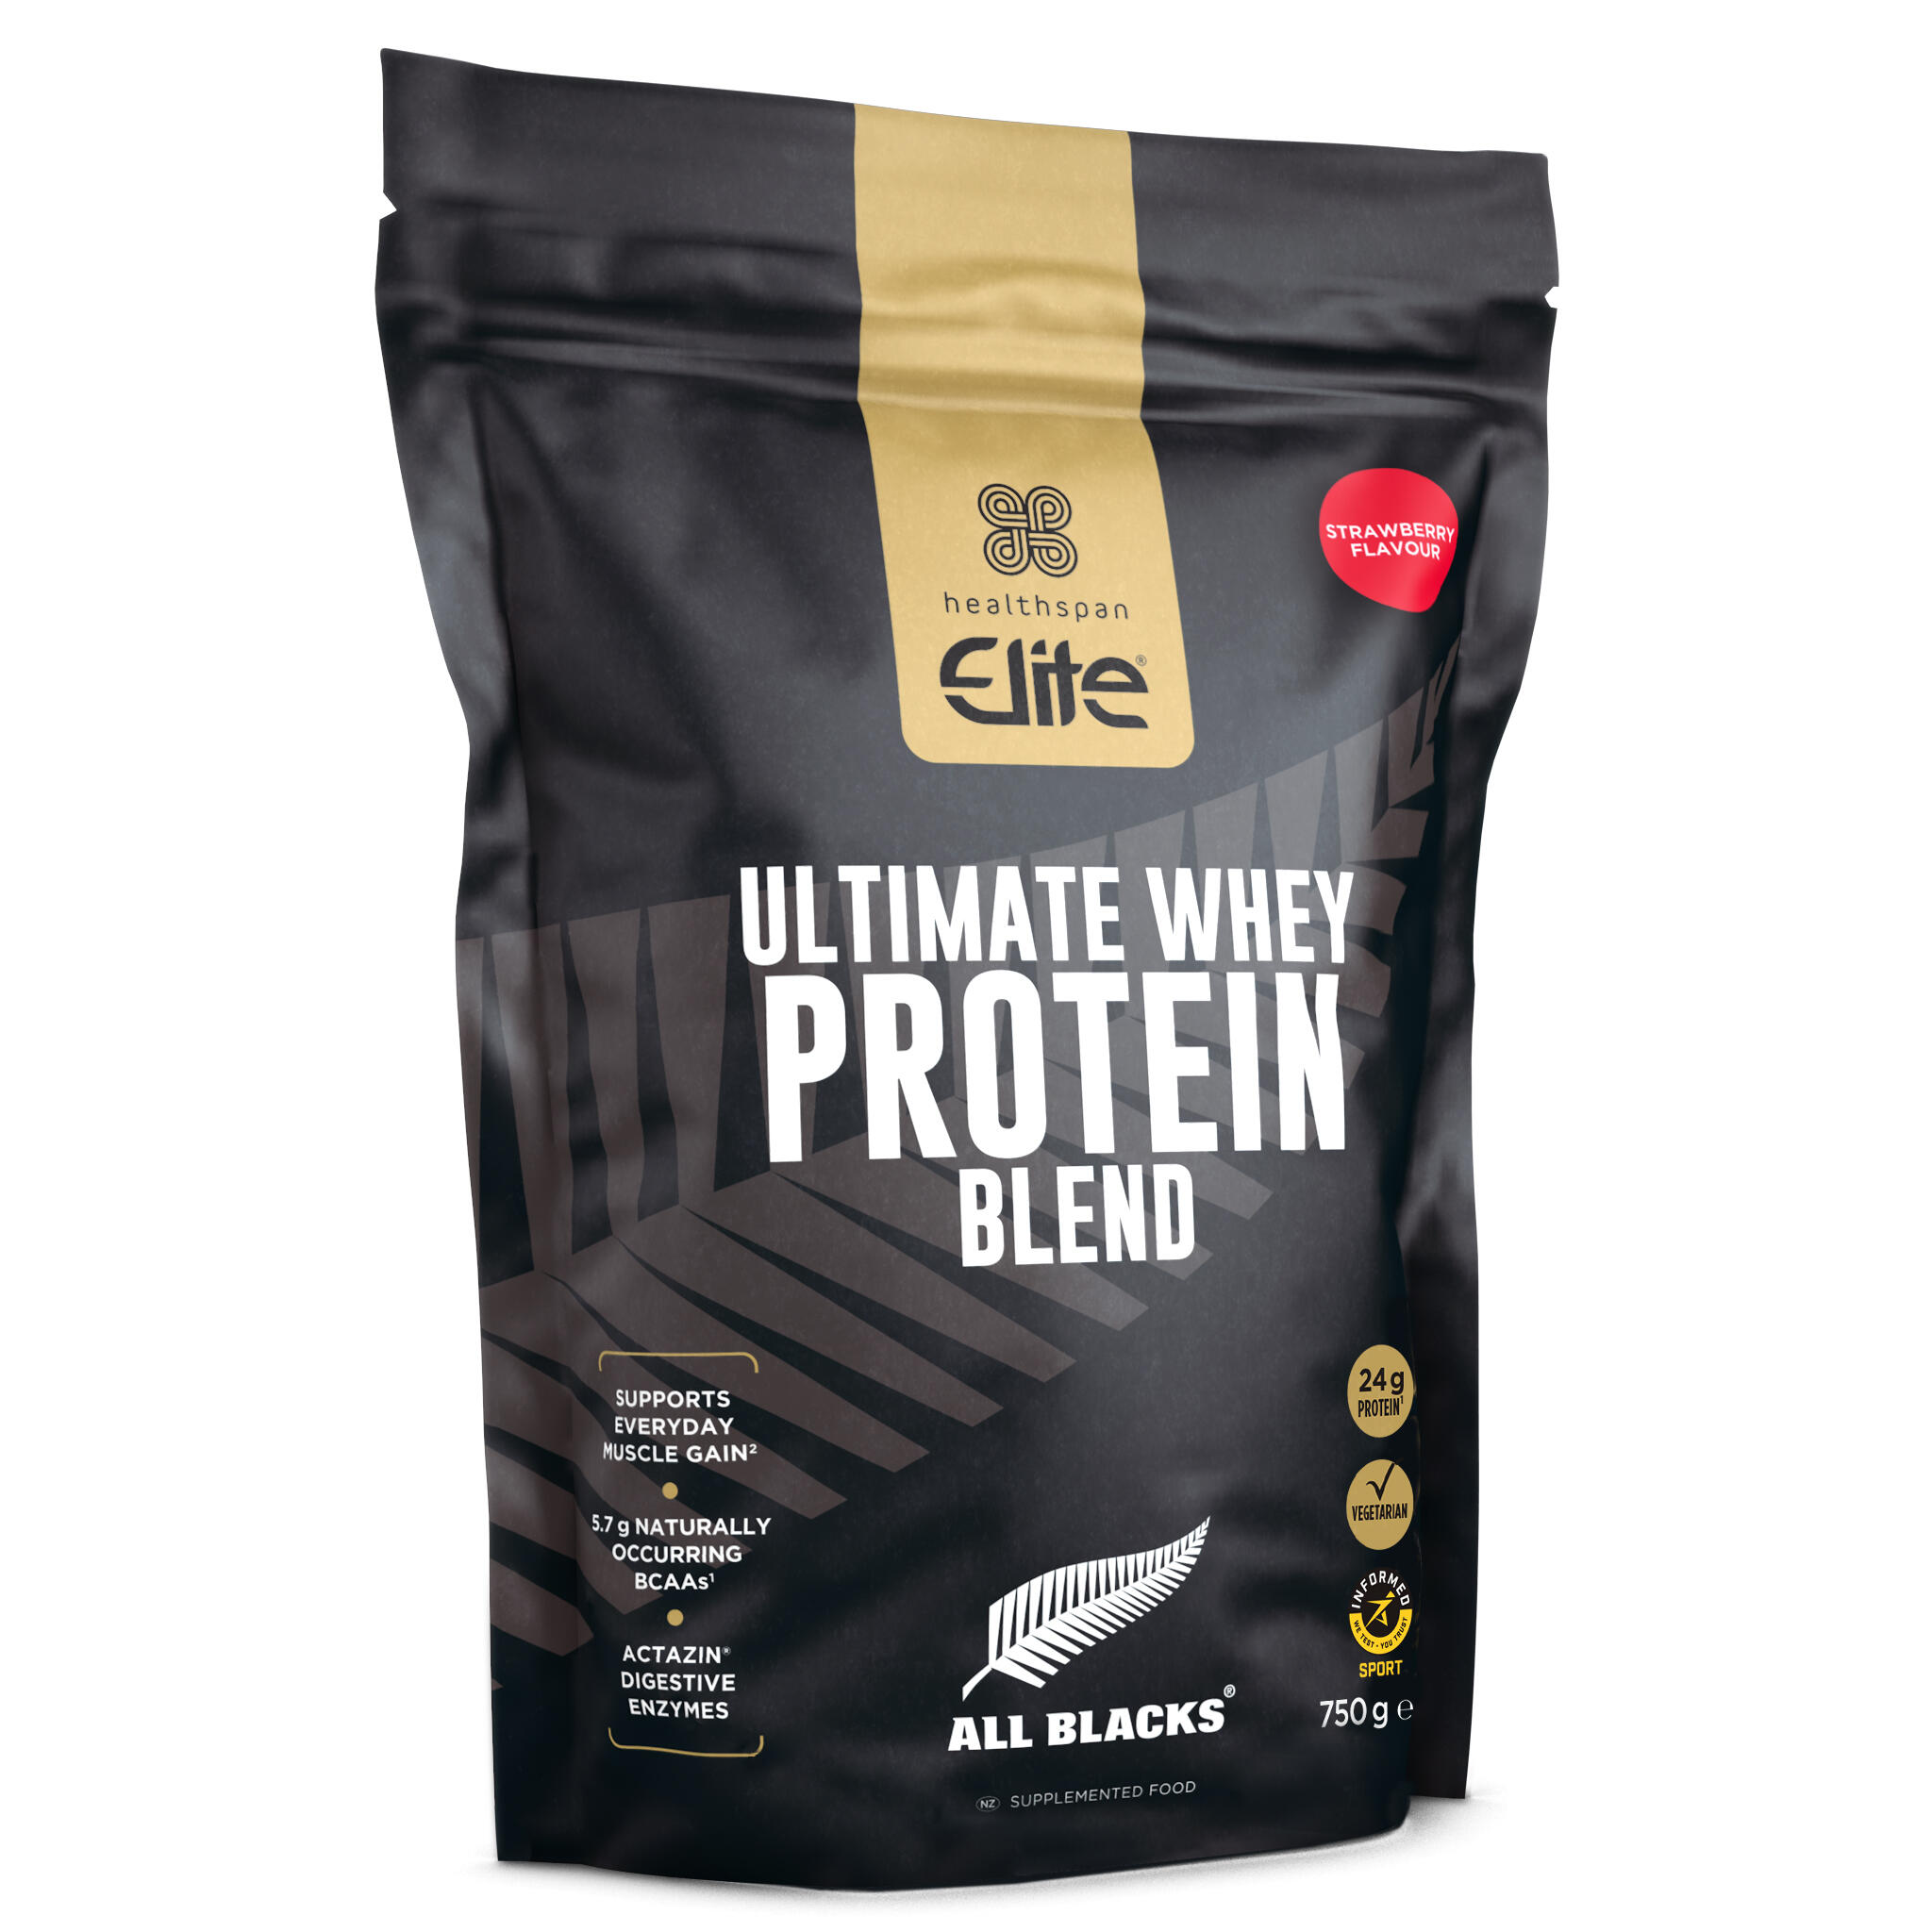 Healthspan Elite All Blacks Ultimate Whey Protein Muscle Growth 750g Strawberry